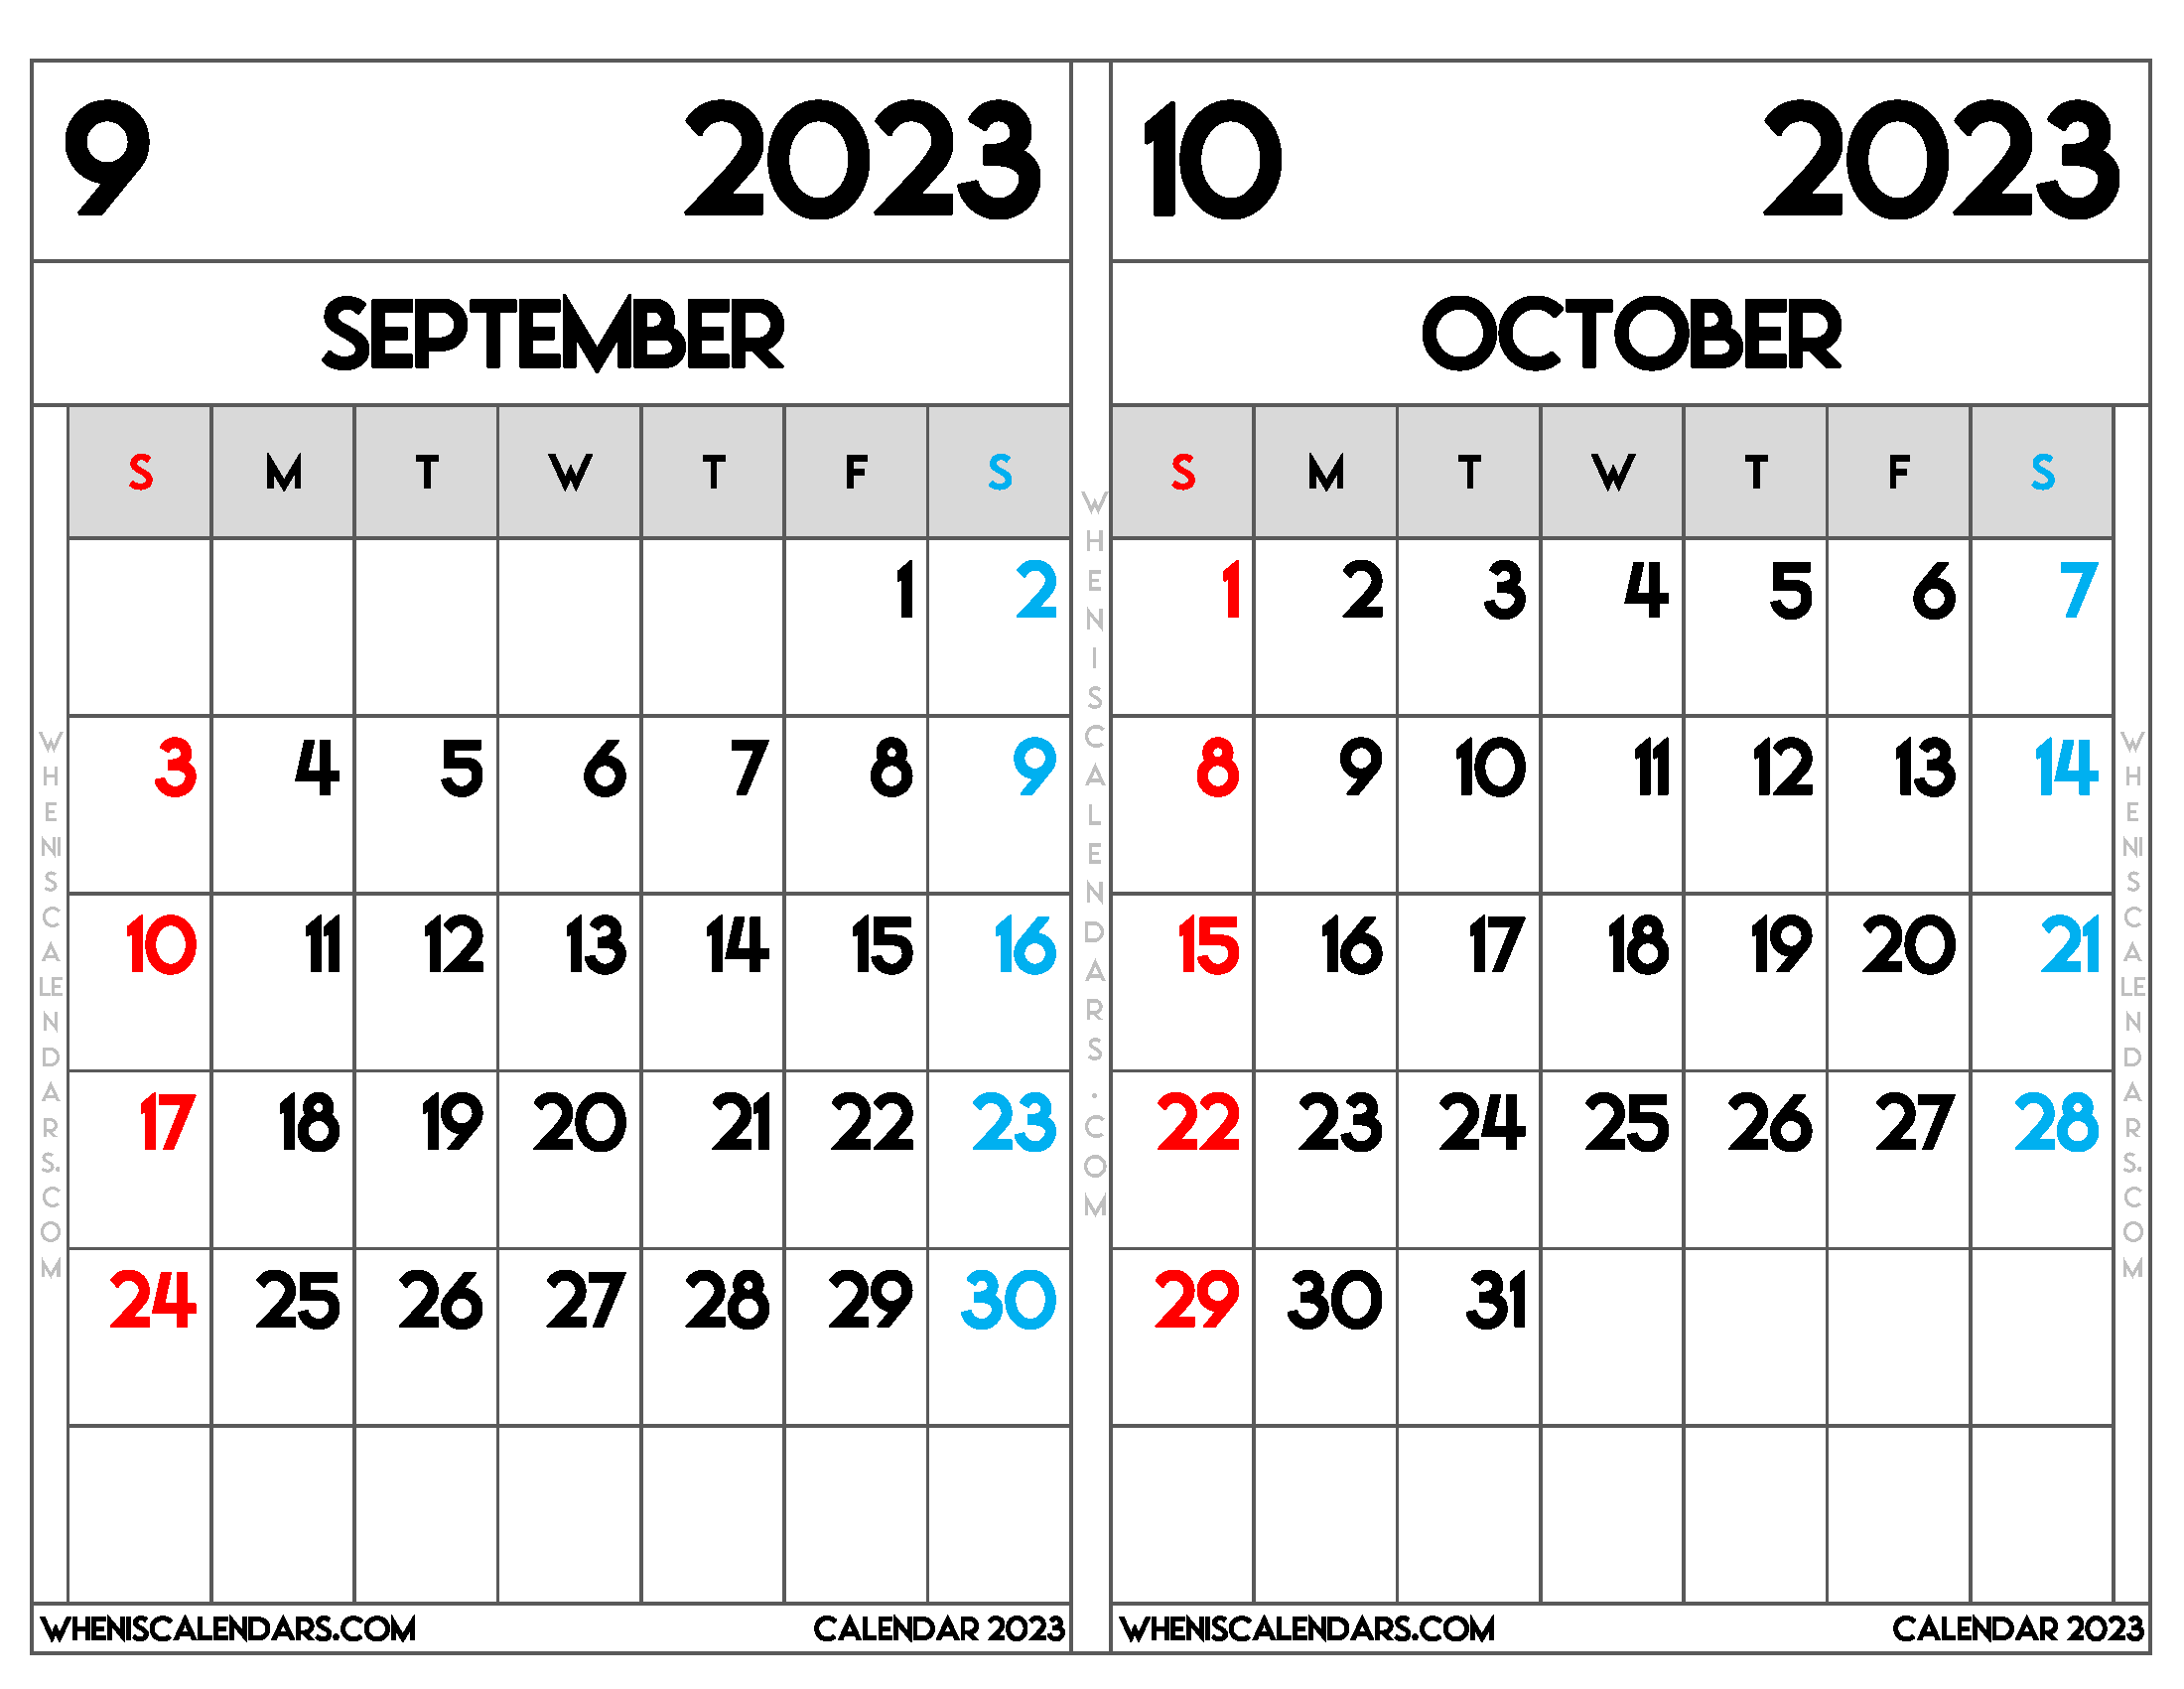 Download Printable September and October 2023 Calendar as PDF and PNG Image